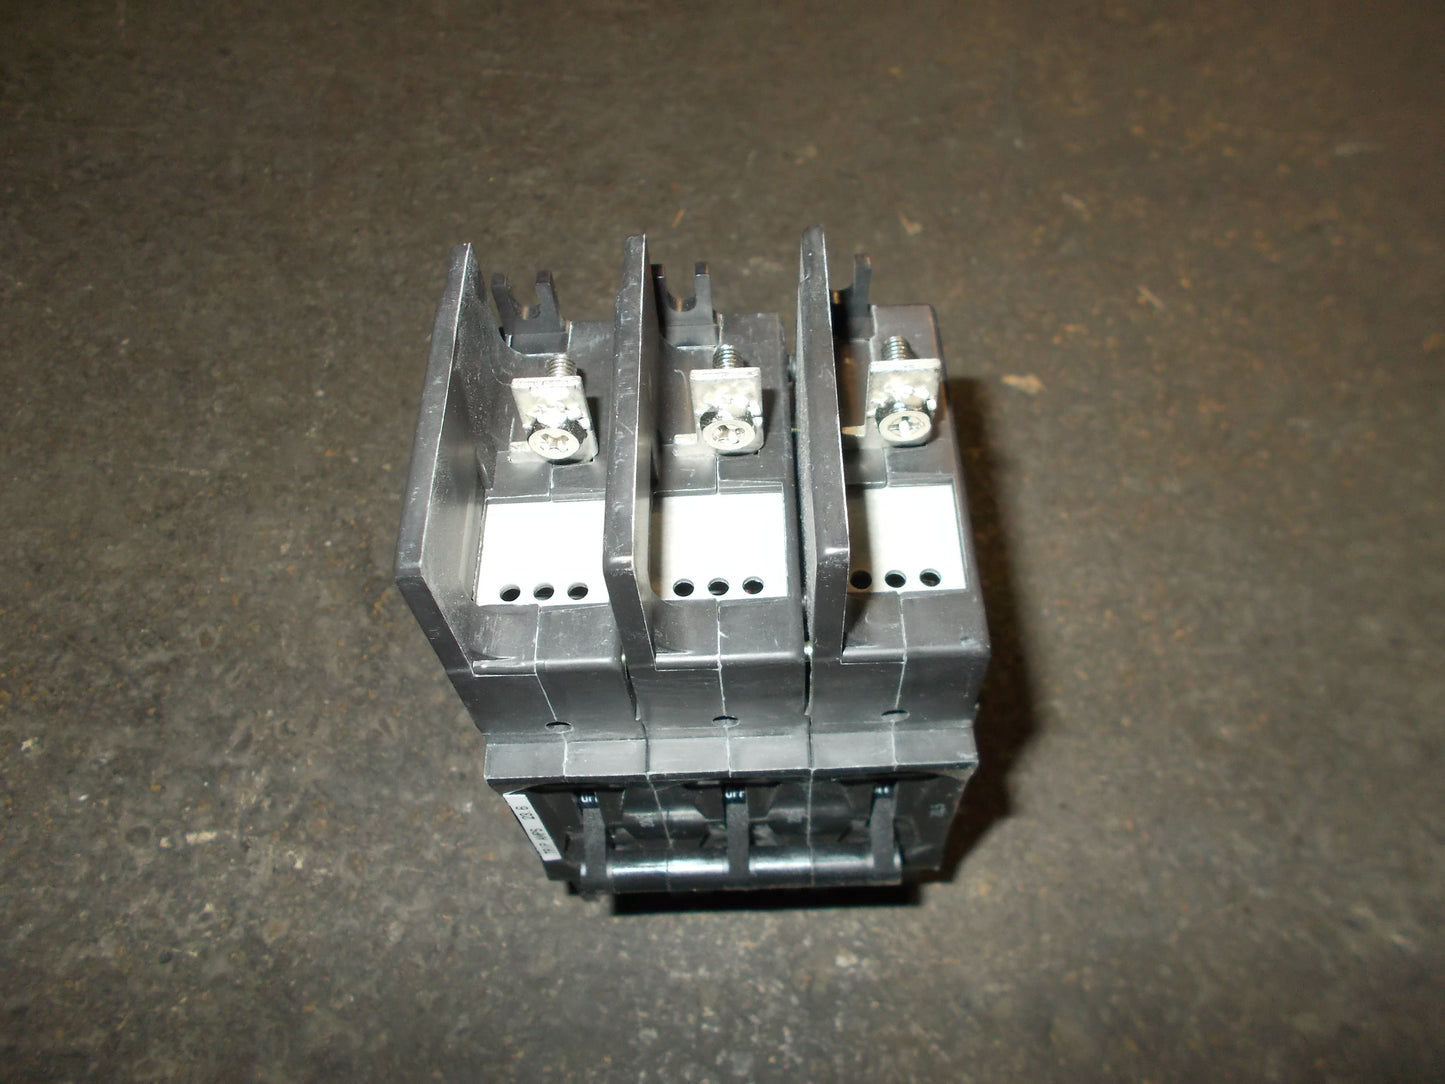 3 POLE 20.5 AMP "219 MULTI-POLE" SERIES HYDRAULIC MAGNETIC CIRCUIT BREAKER PROTECTOR/FOR MANUAL MOTOR CONTROLLER APPLICATIONS 600/50-60/1 OR 3